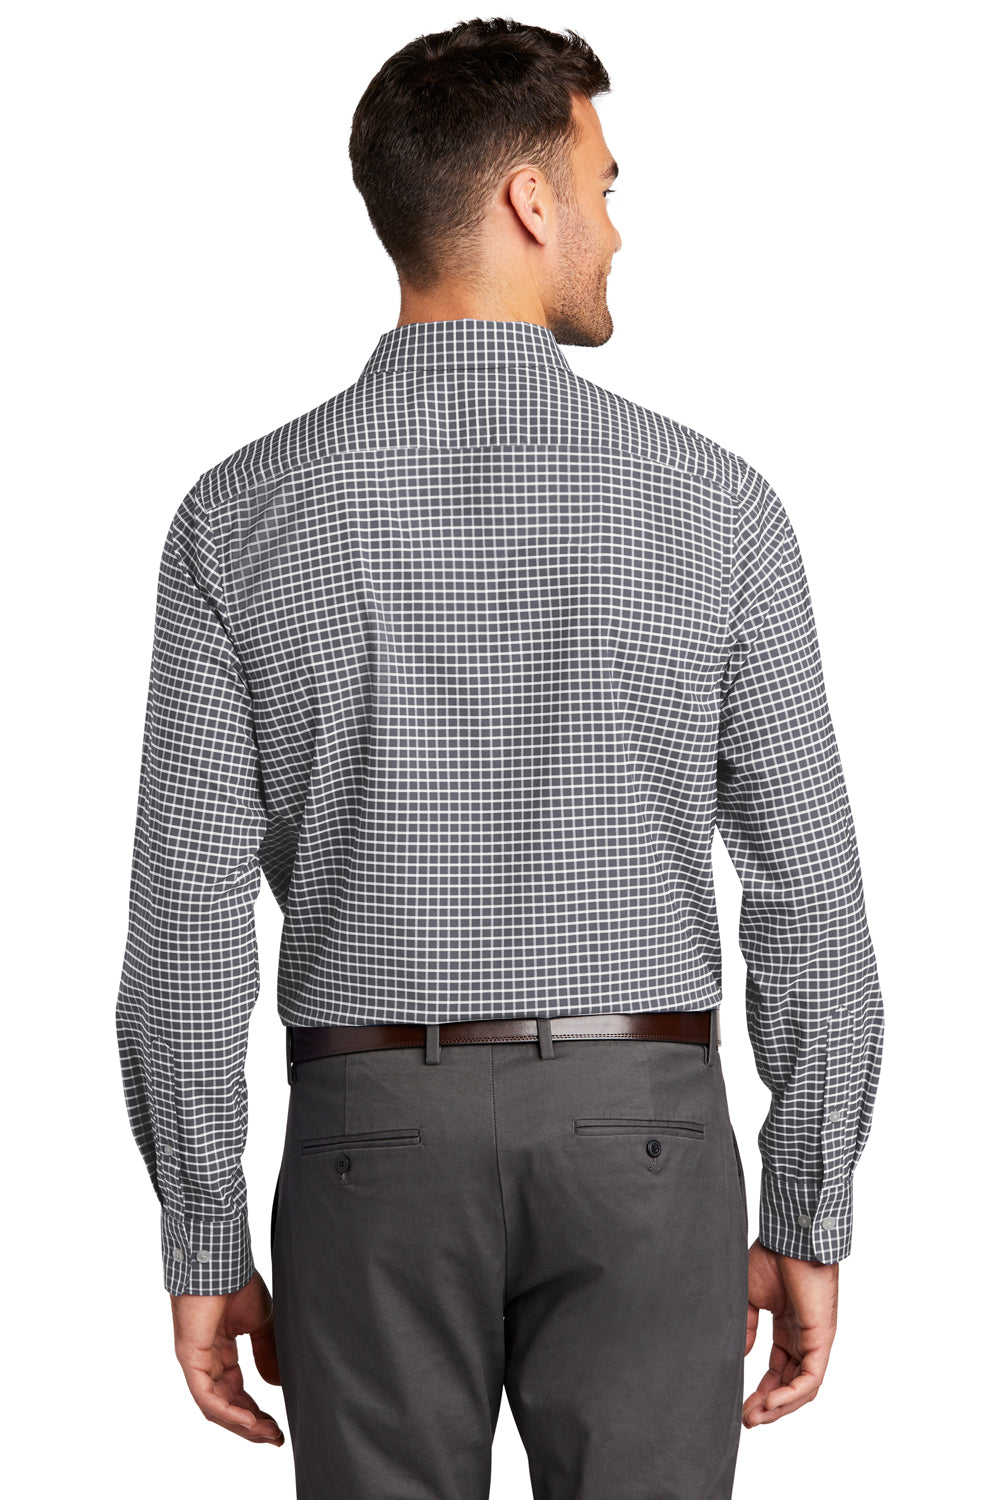 Port Authority Mens City Stretch Long Sleeve Button Down Shirt Graphite Grey/White Side